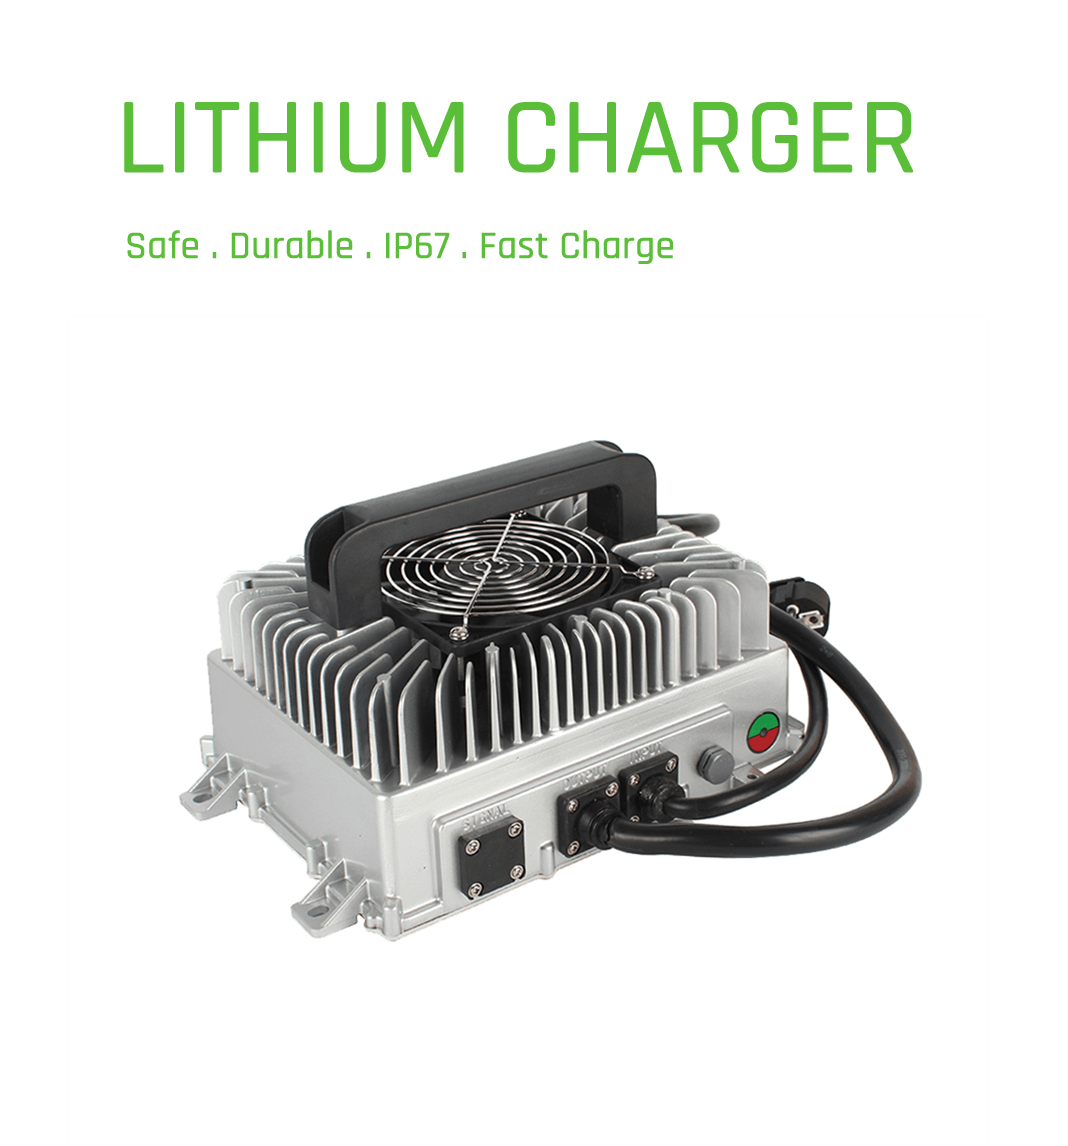 lithium charger